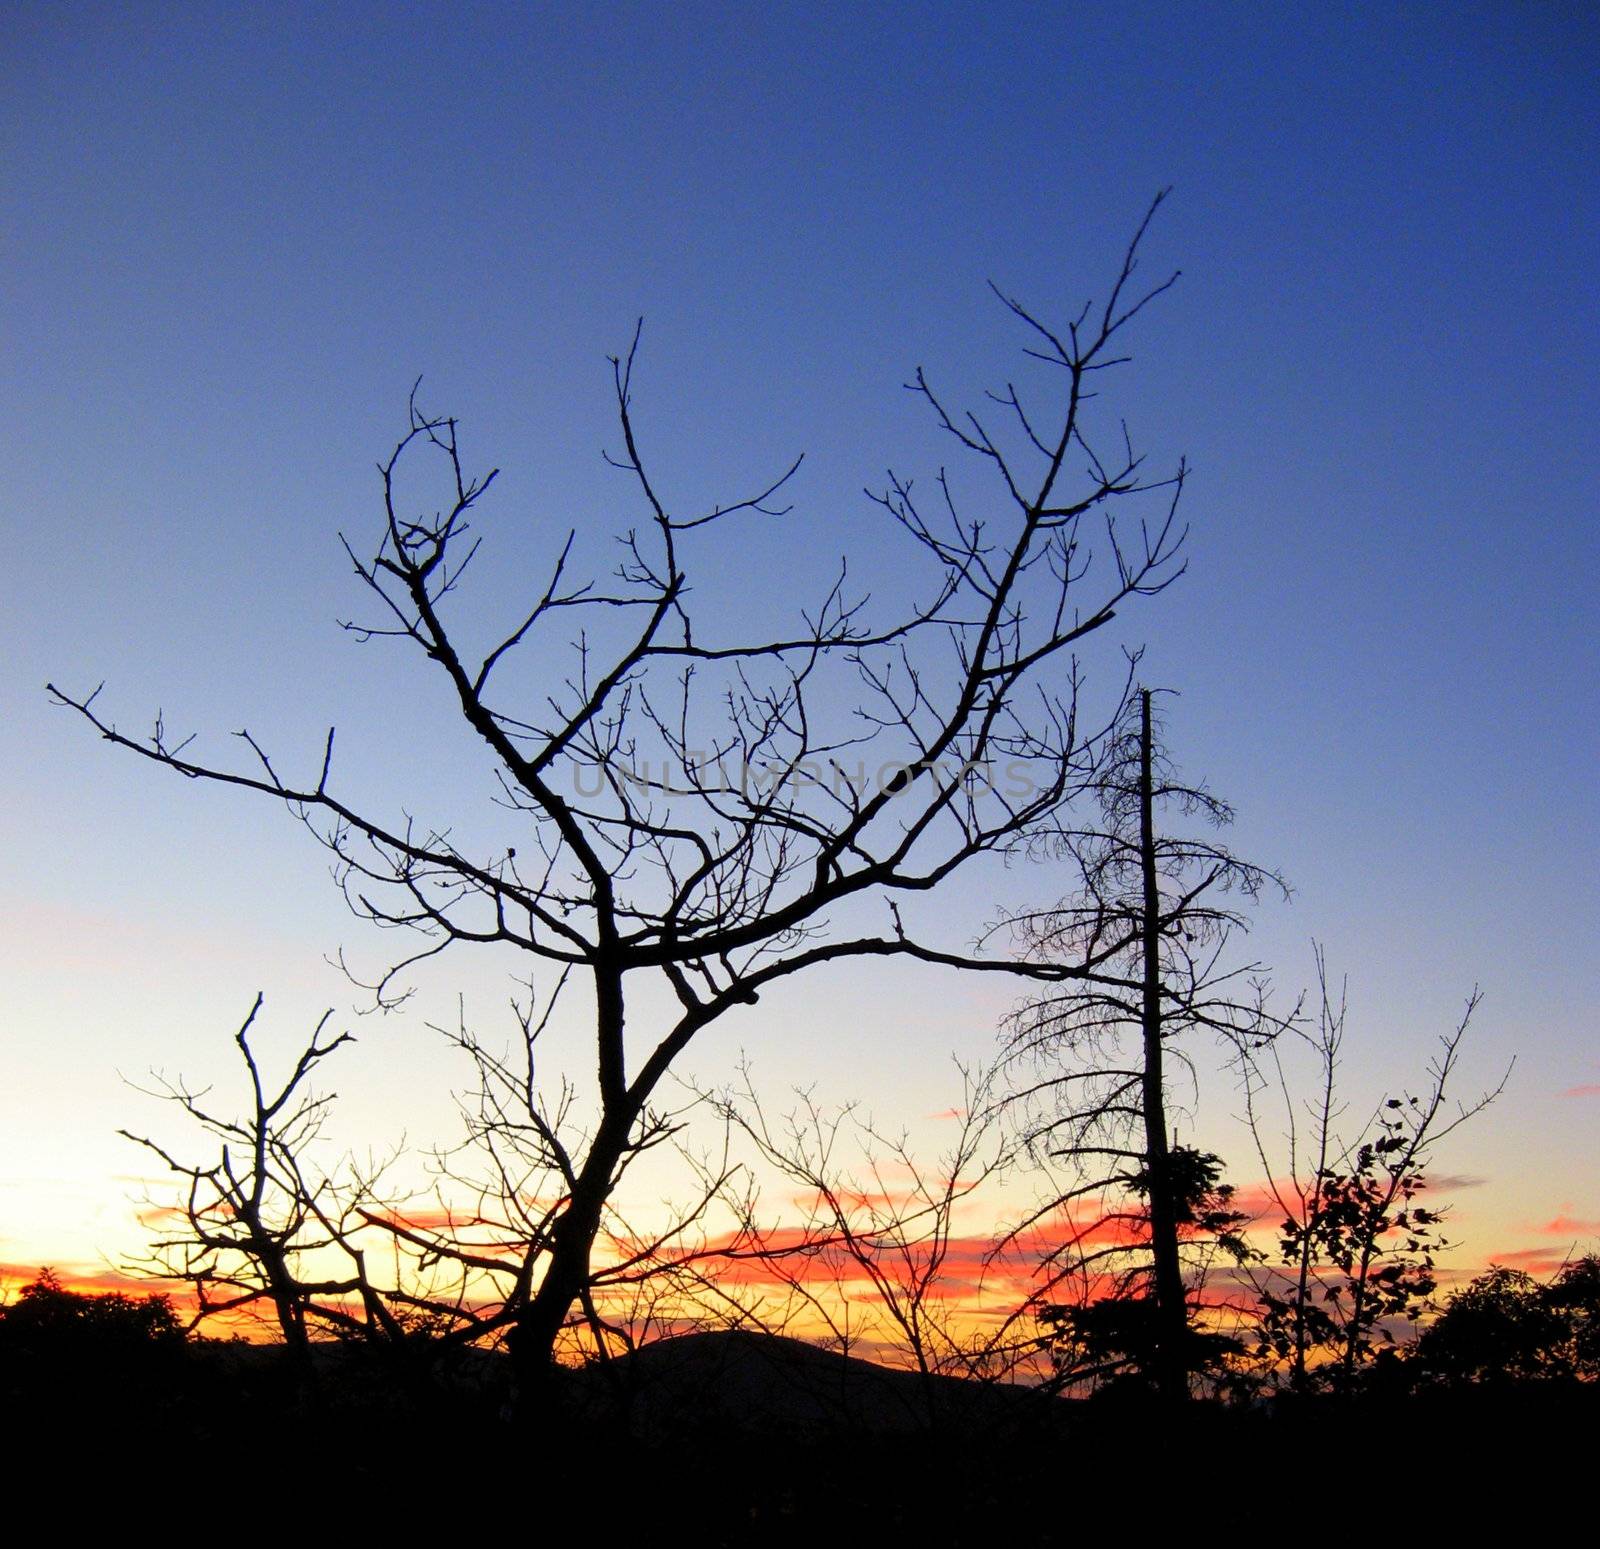 A crooked tree contrasting with a straight tree, showing as silhouettes at twilight